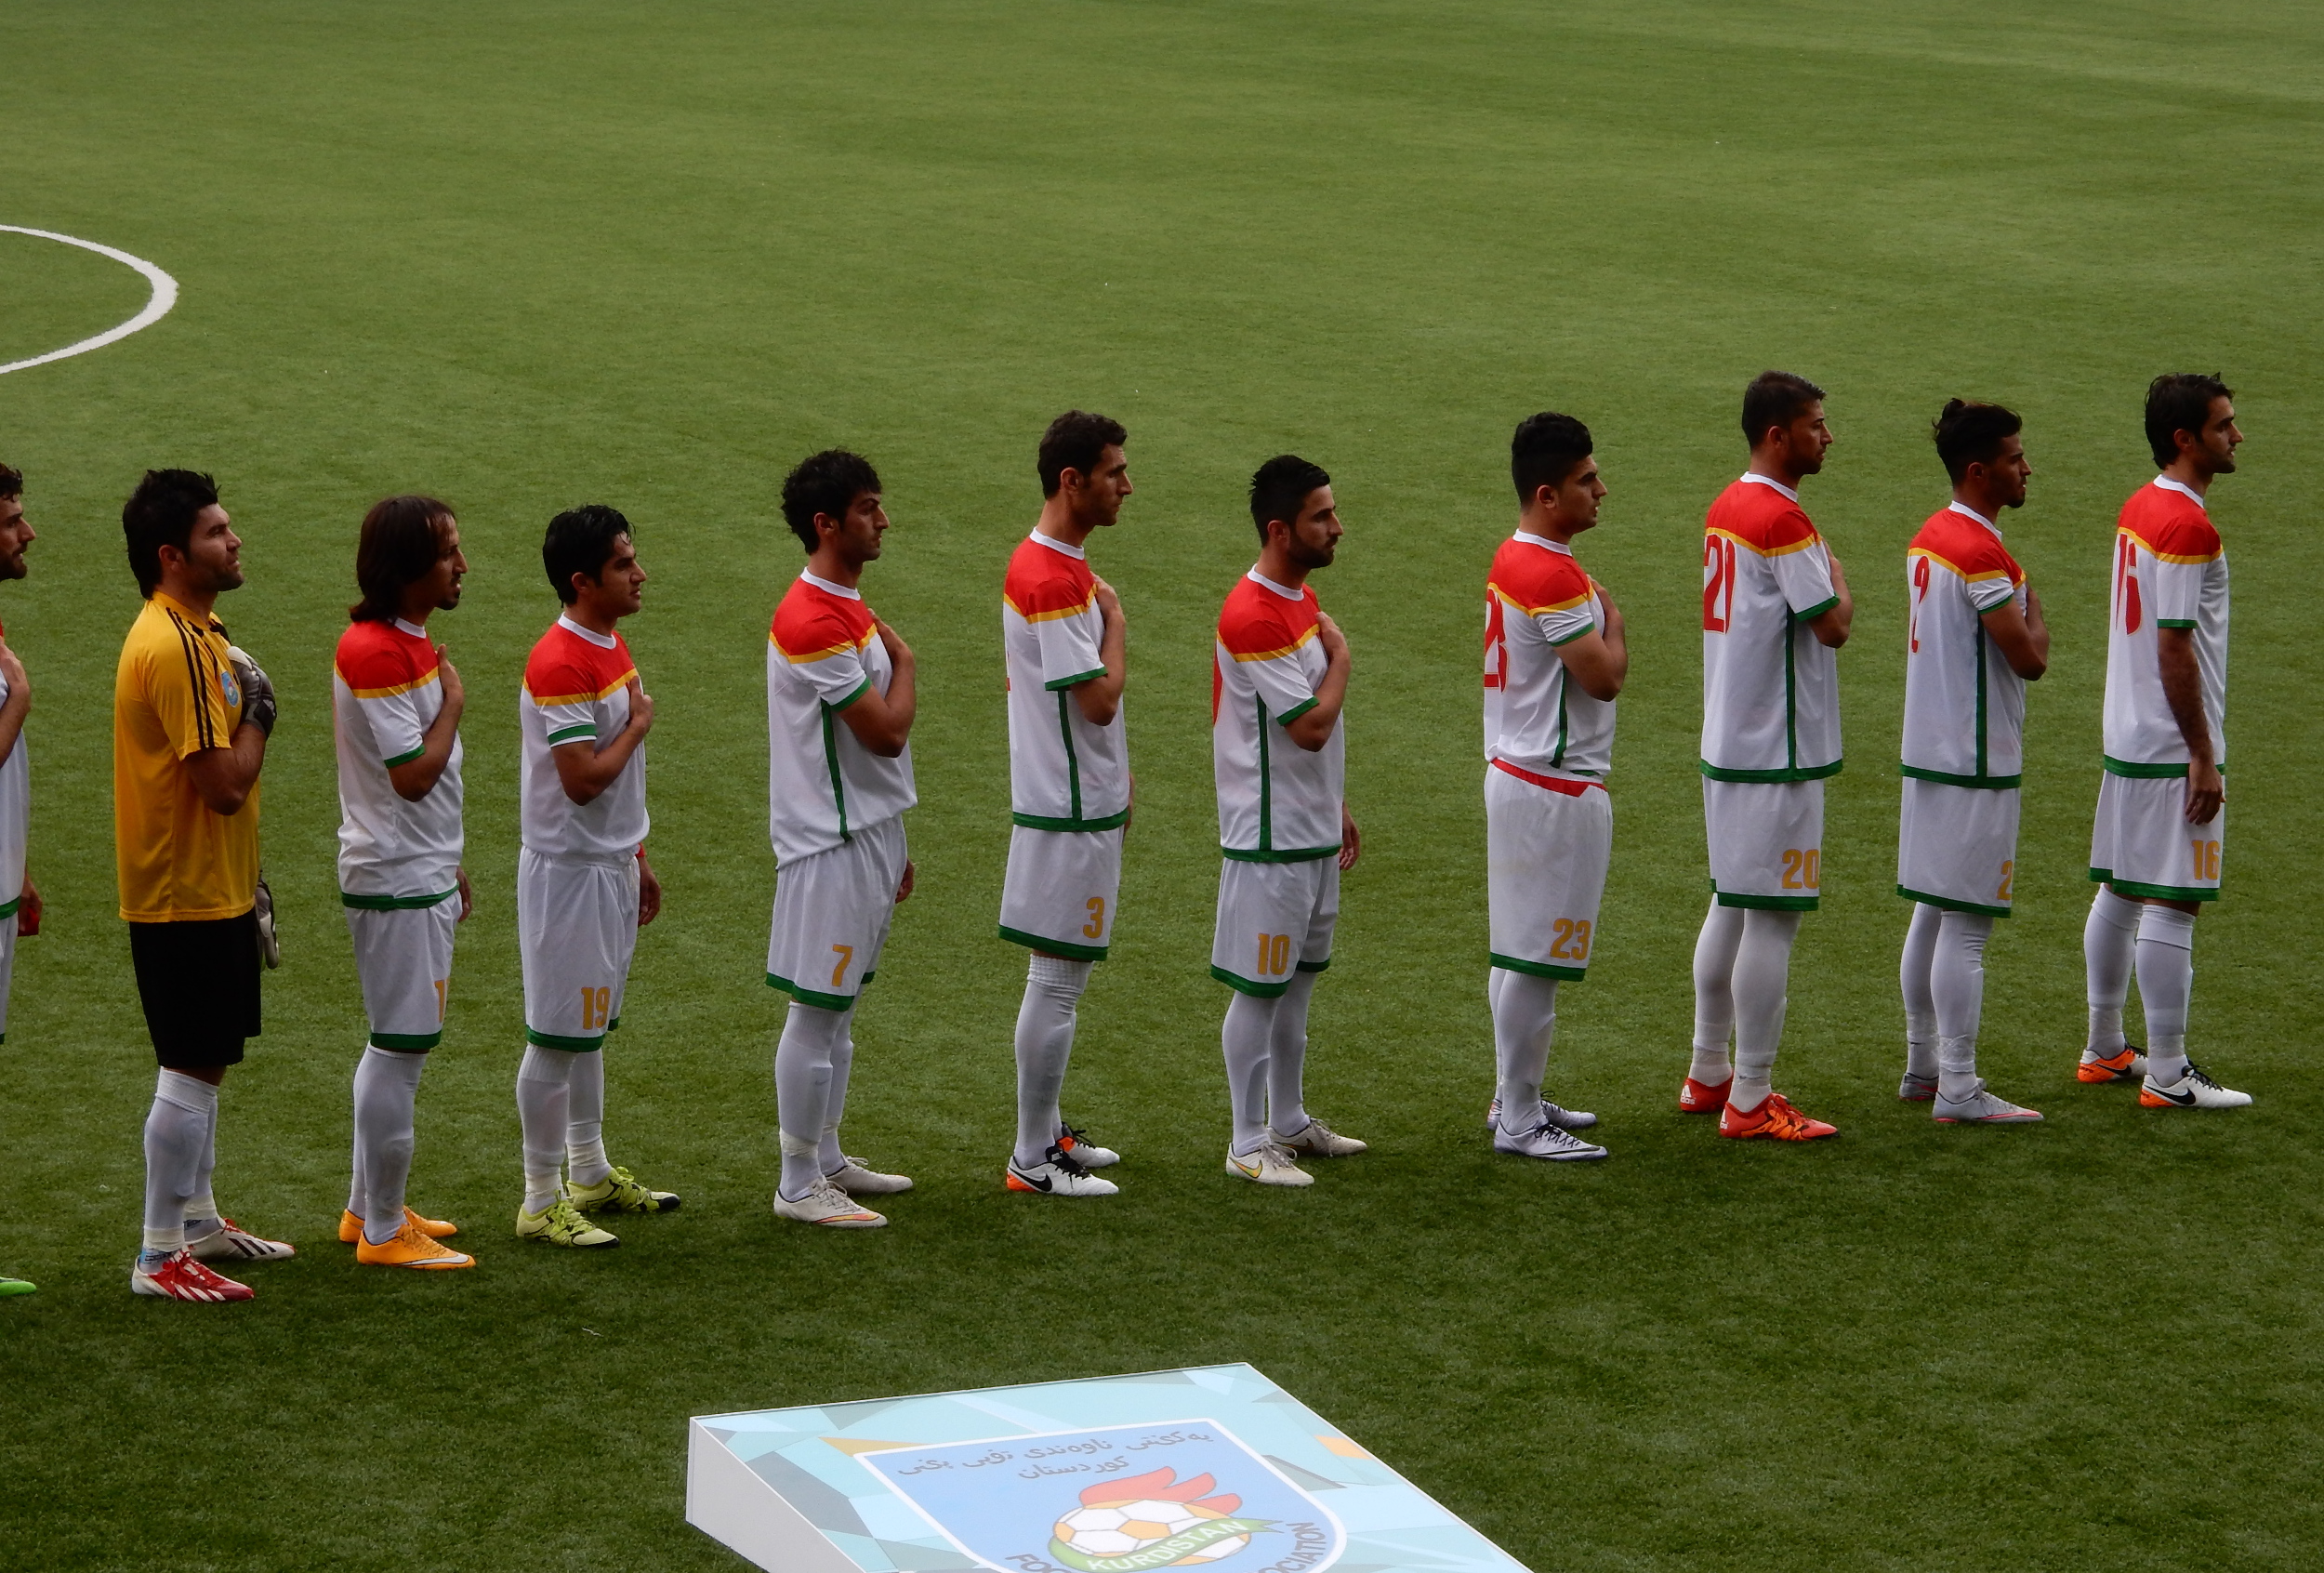 Kurdistan's football team at the playing of the national anthem